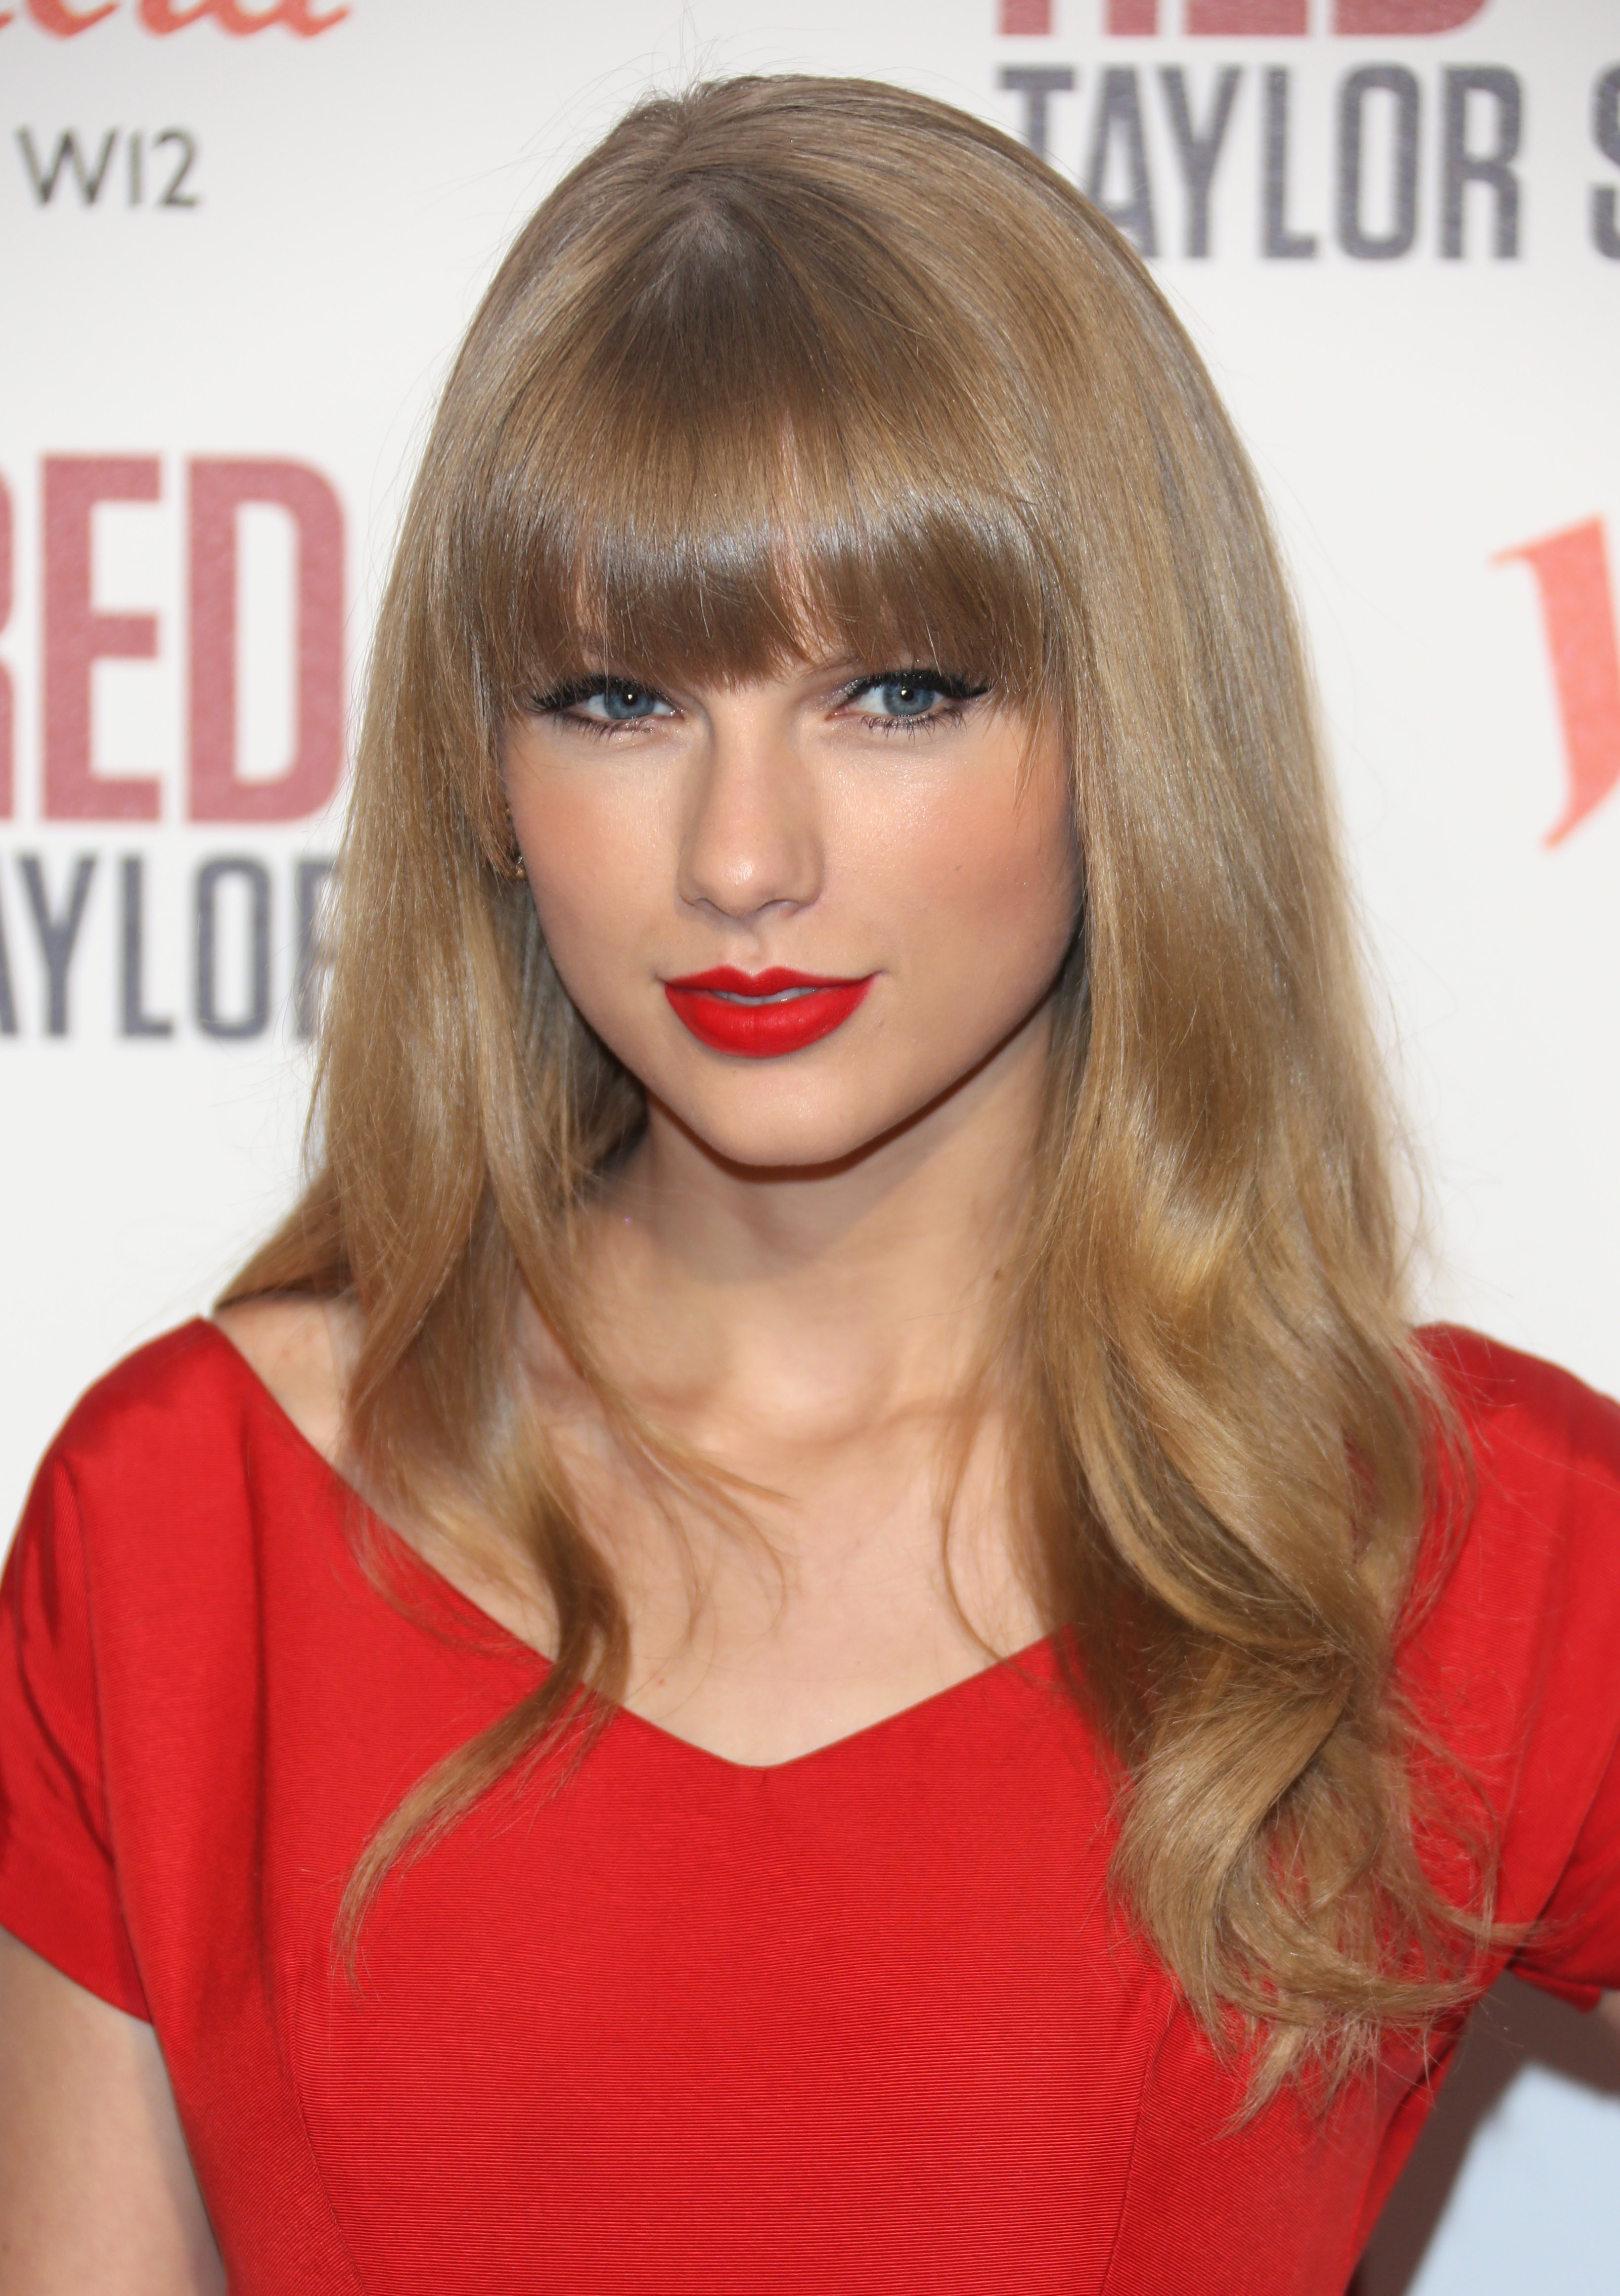 Taylor Swift Looking Hot In Red Dress And Lipstick - Taylor Swift Red Bangs - HD Wallpaper 